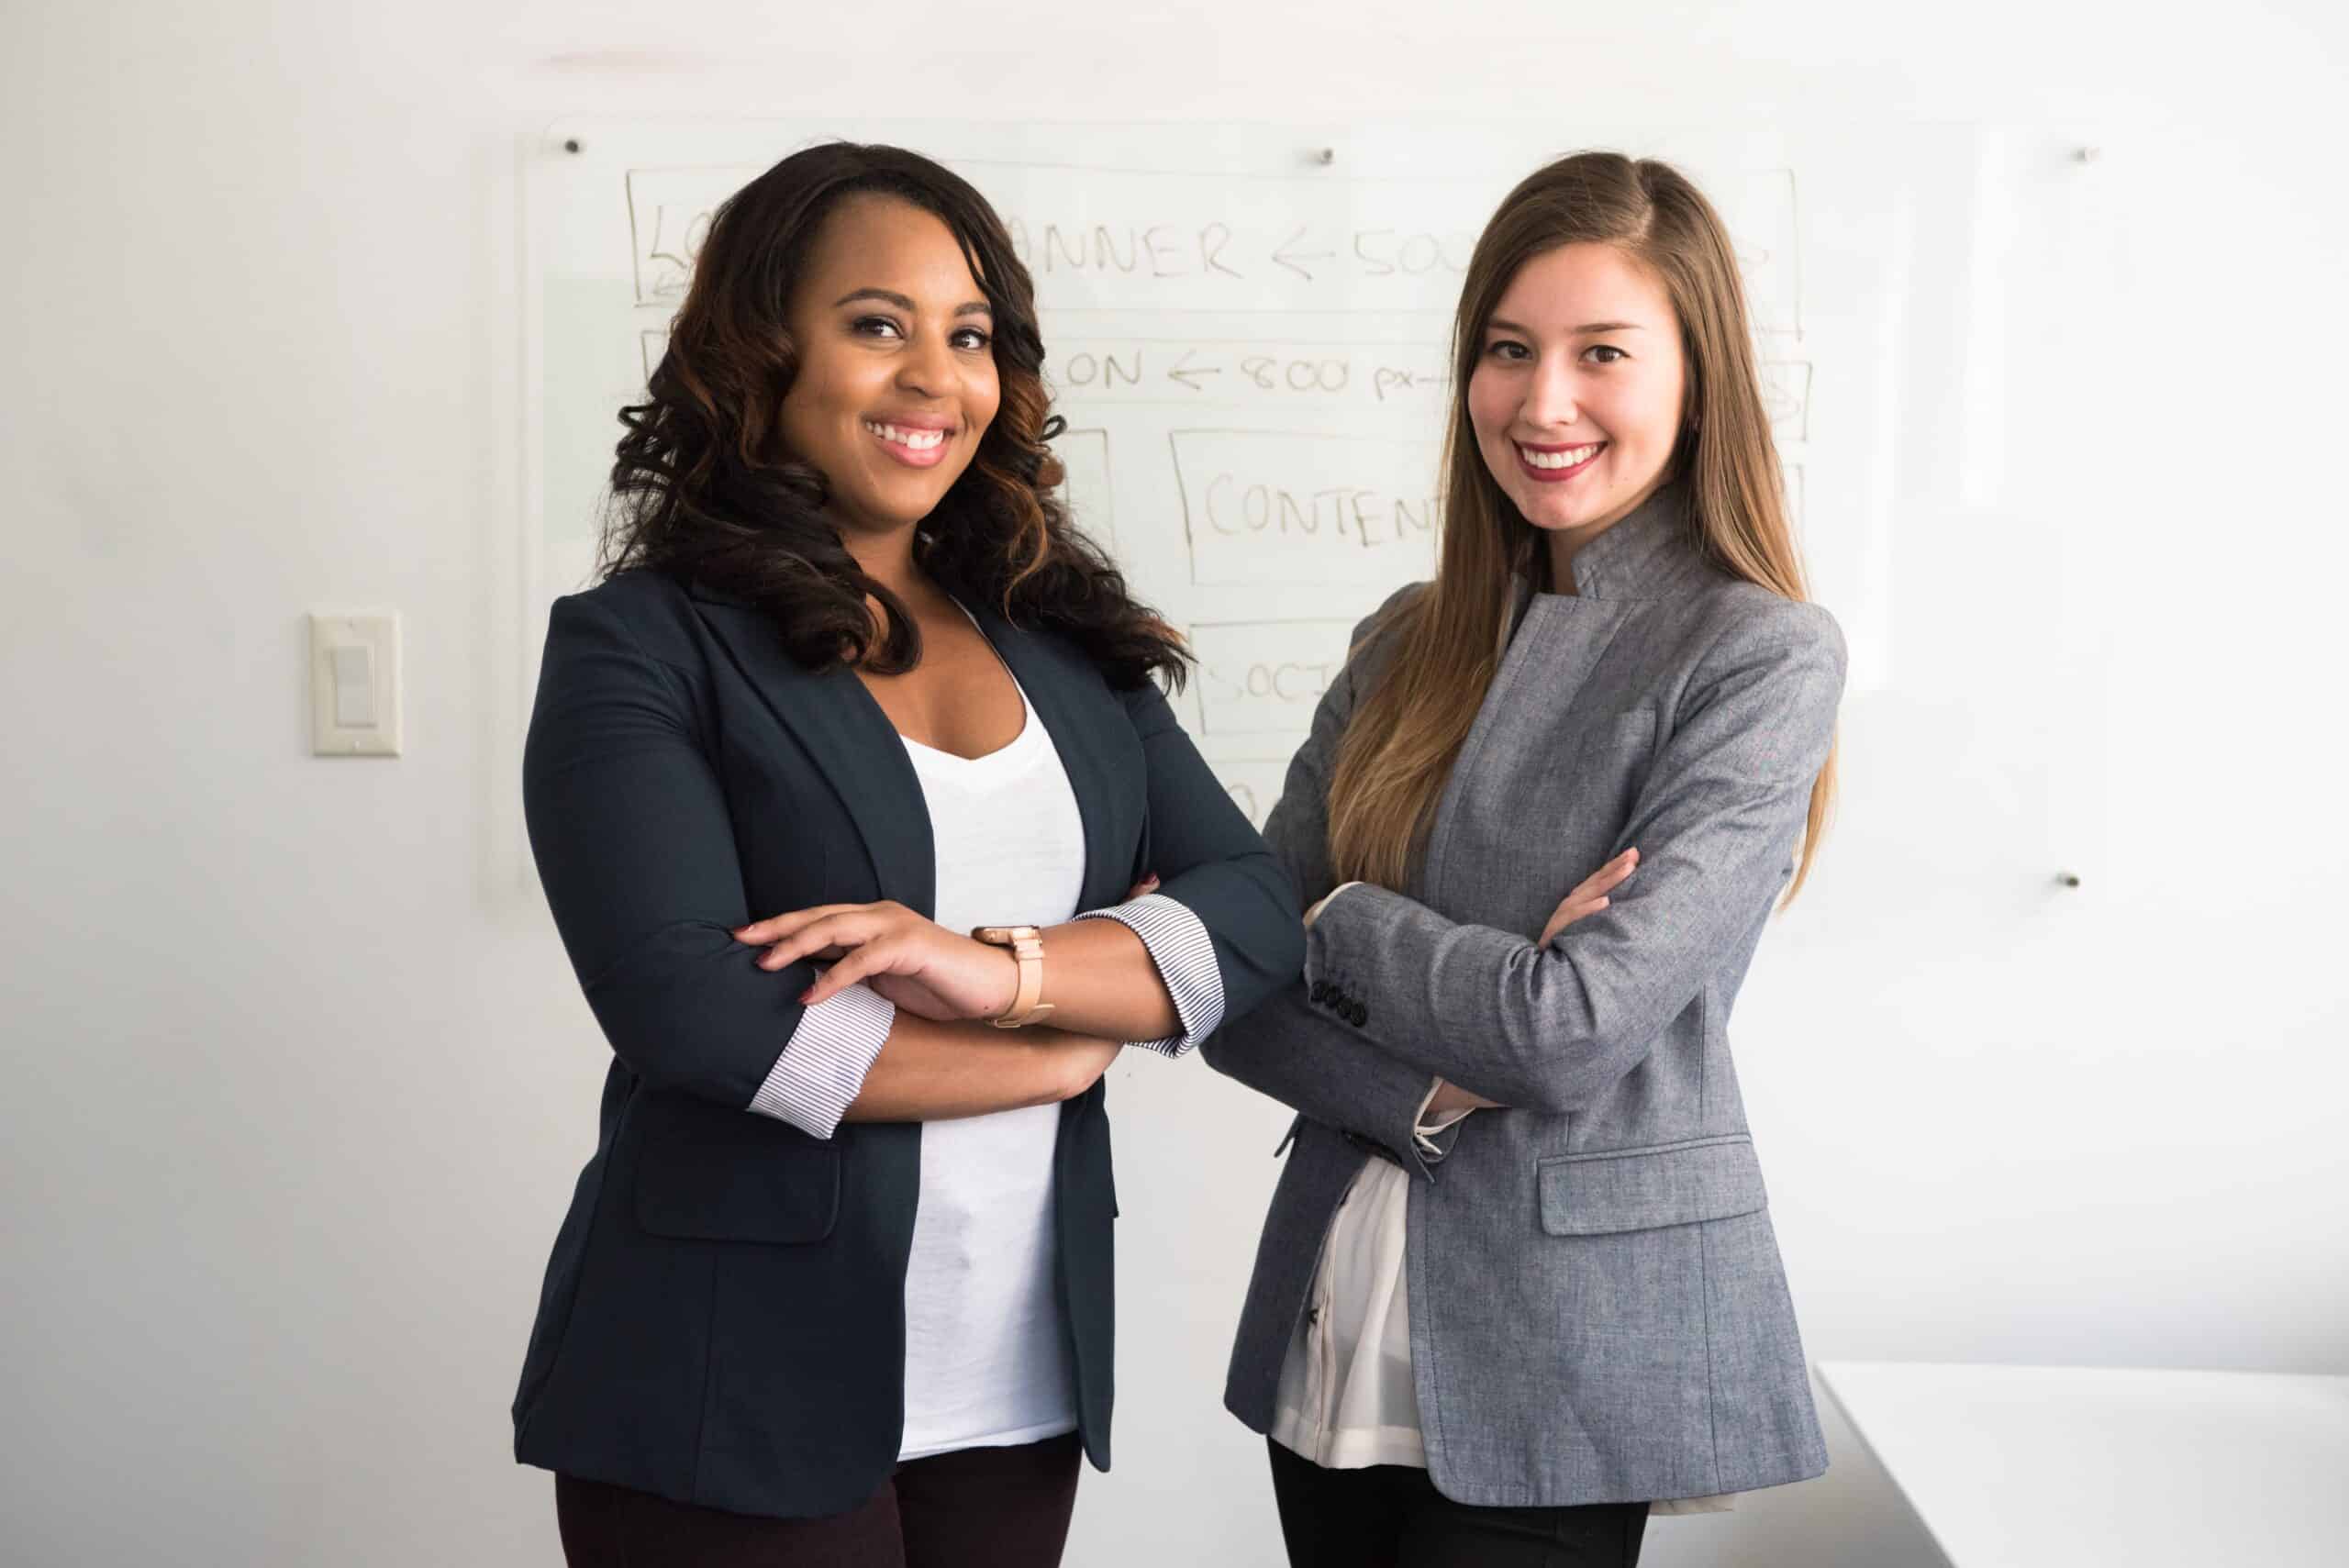 two women in a workplace environment